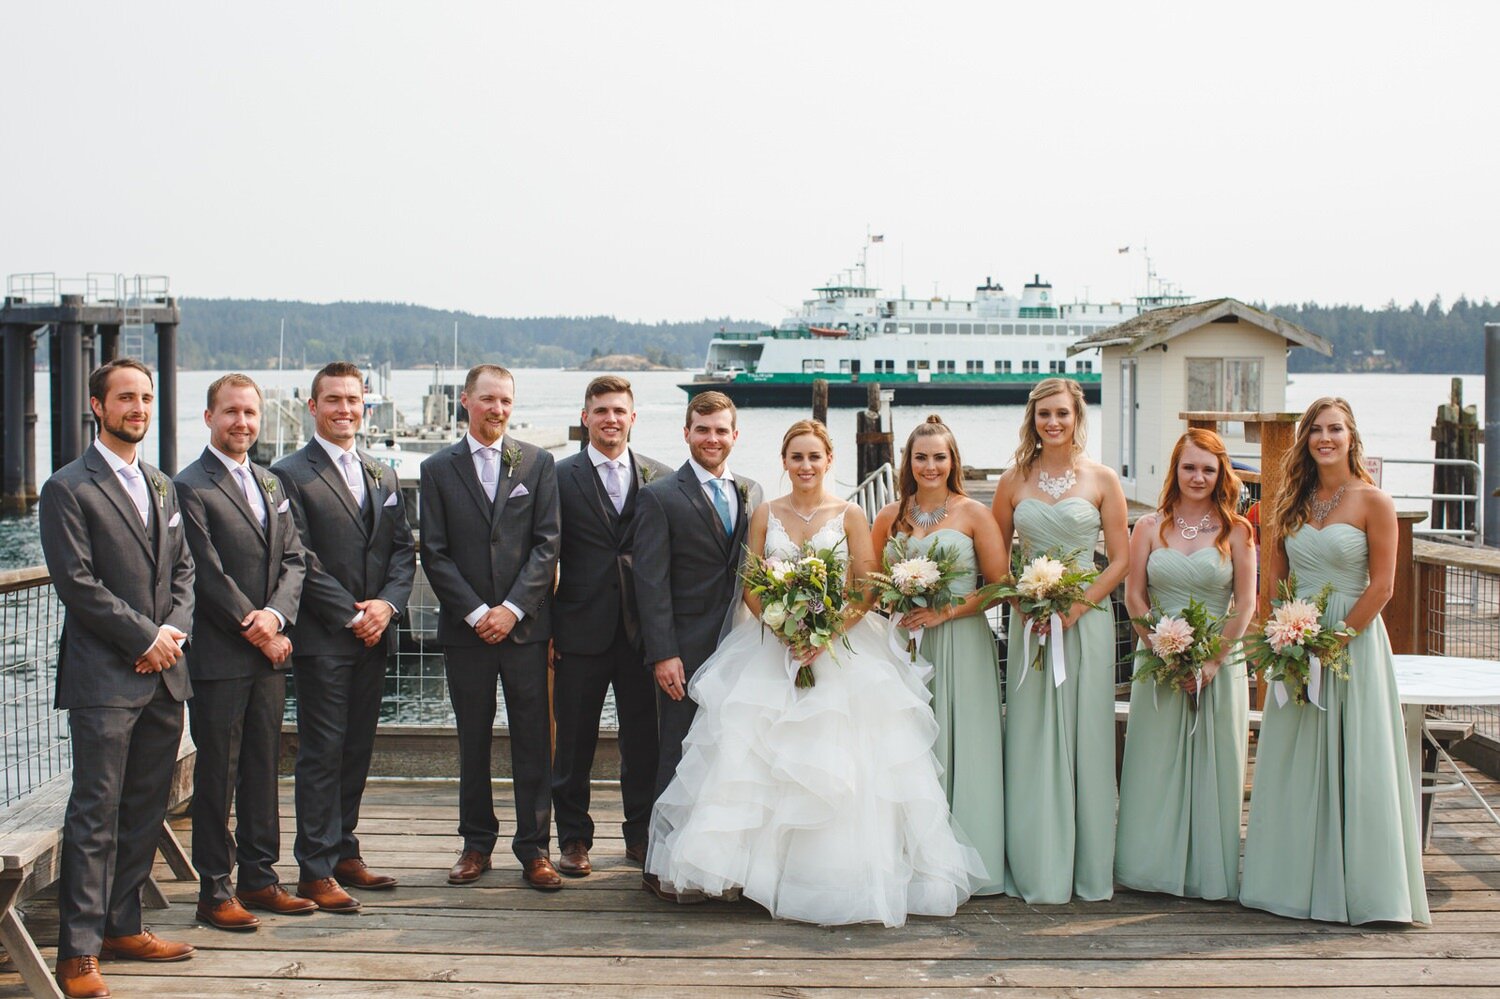 Wedding Party at the Ferry Landing By Satya Curcio photography